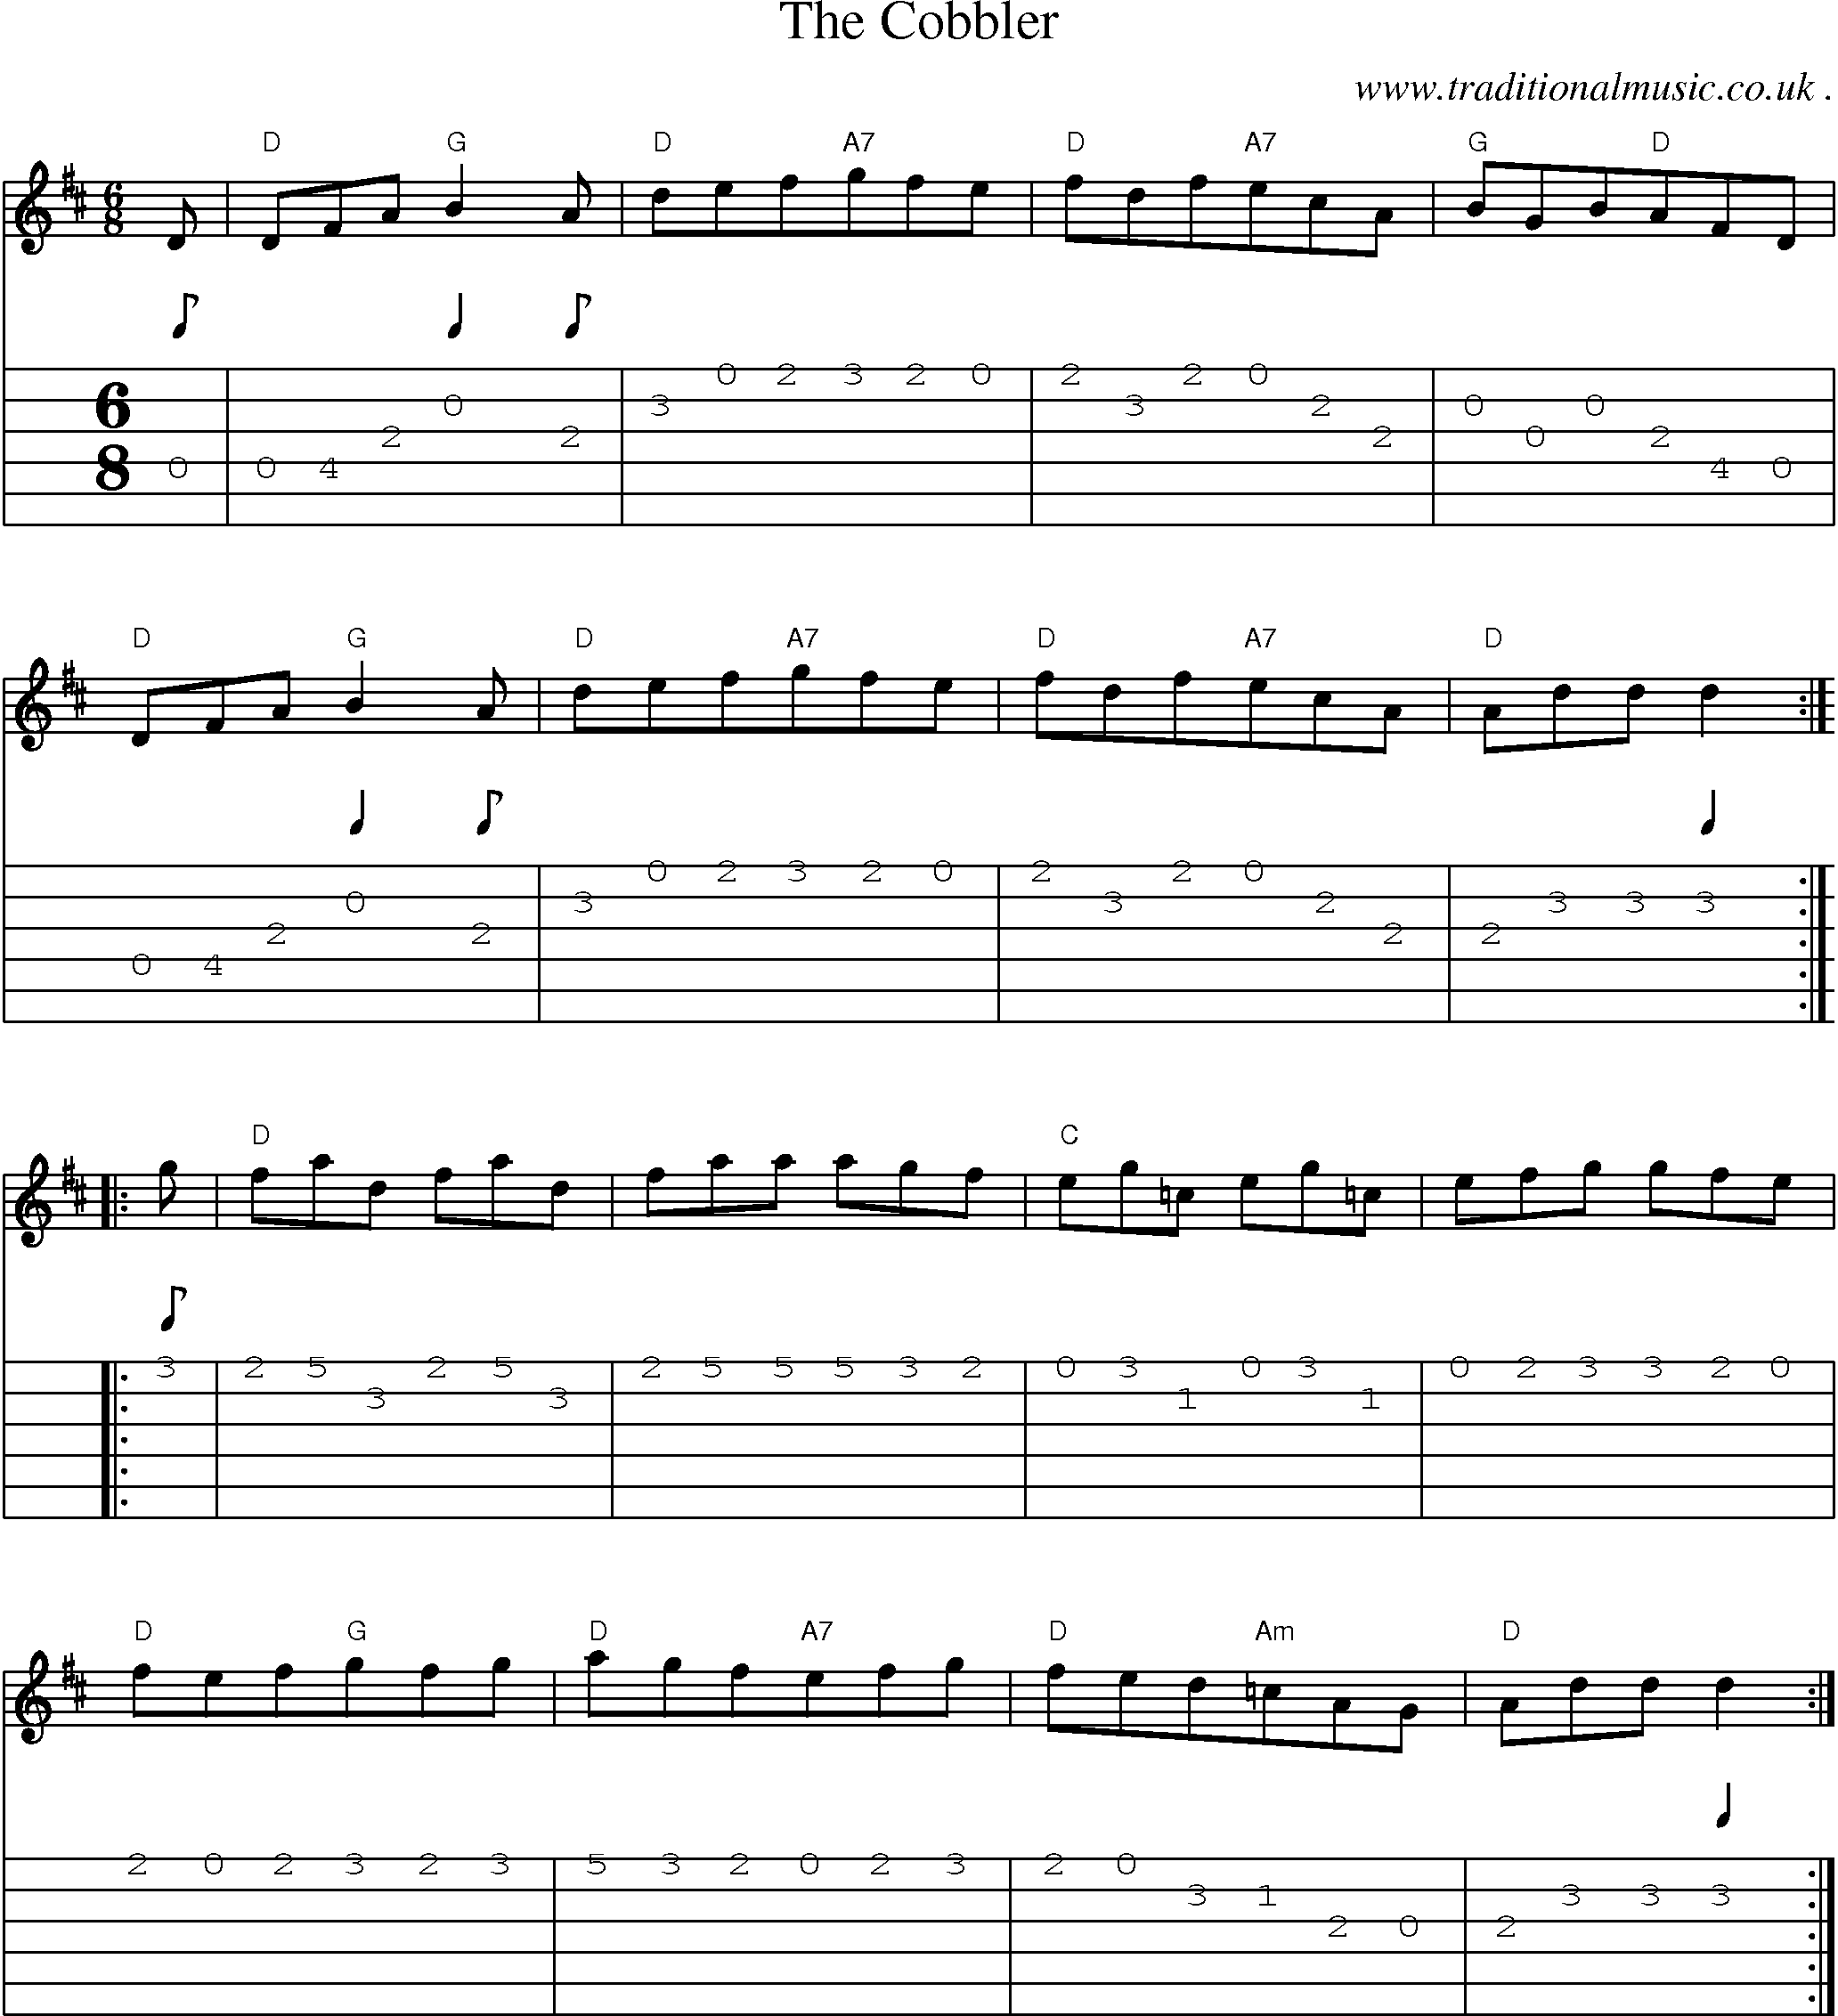 Sheet-Music and Guitar Tabs for The Cobbler